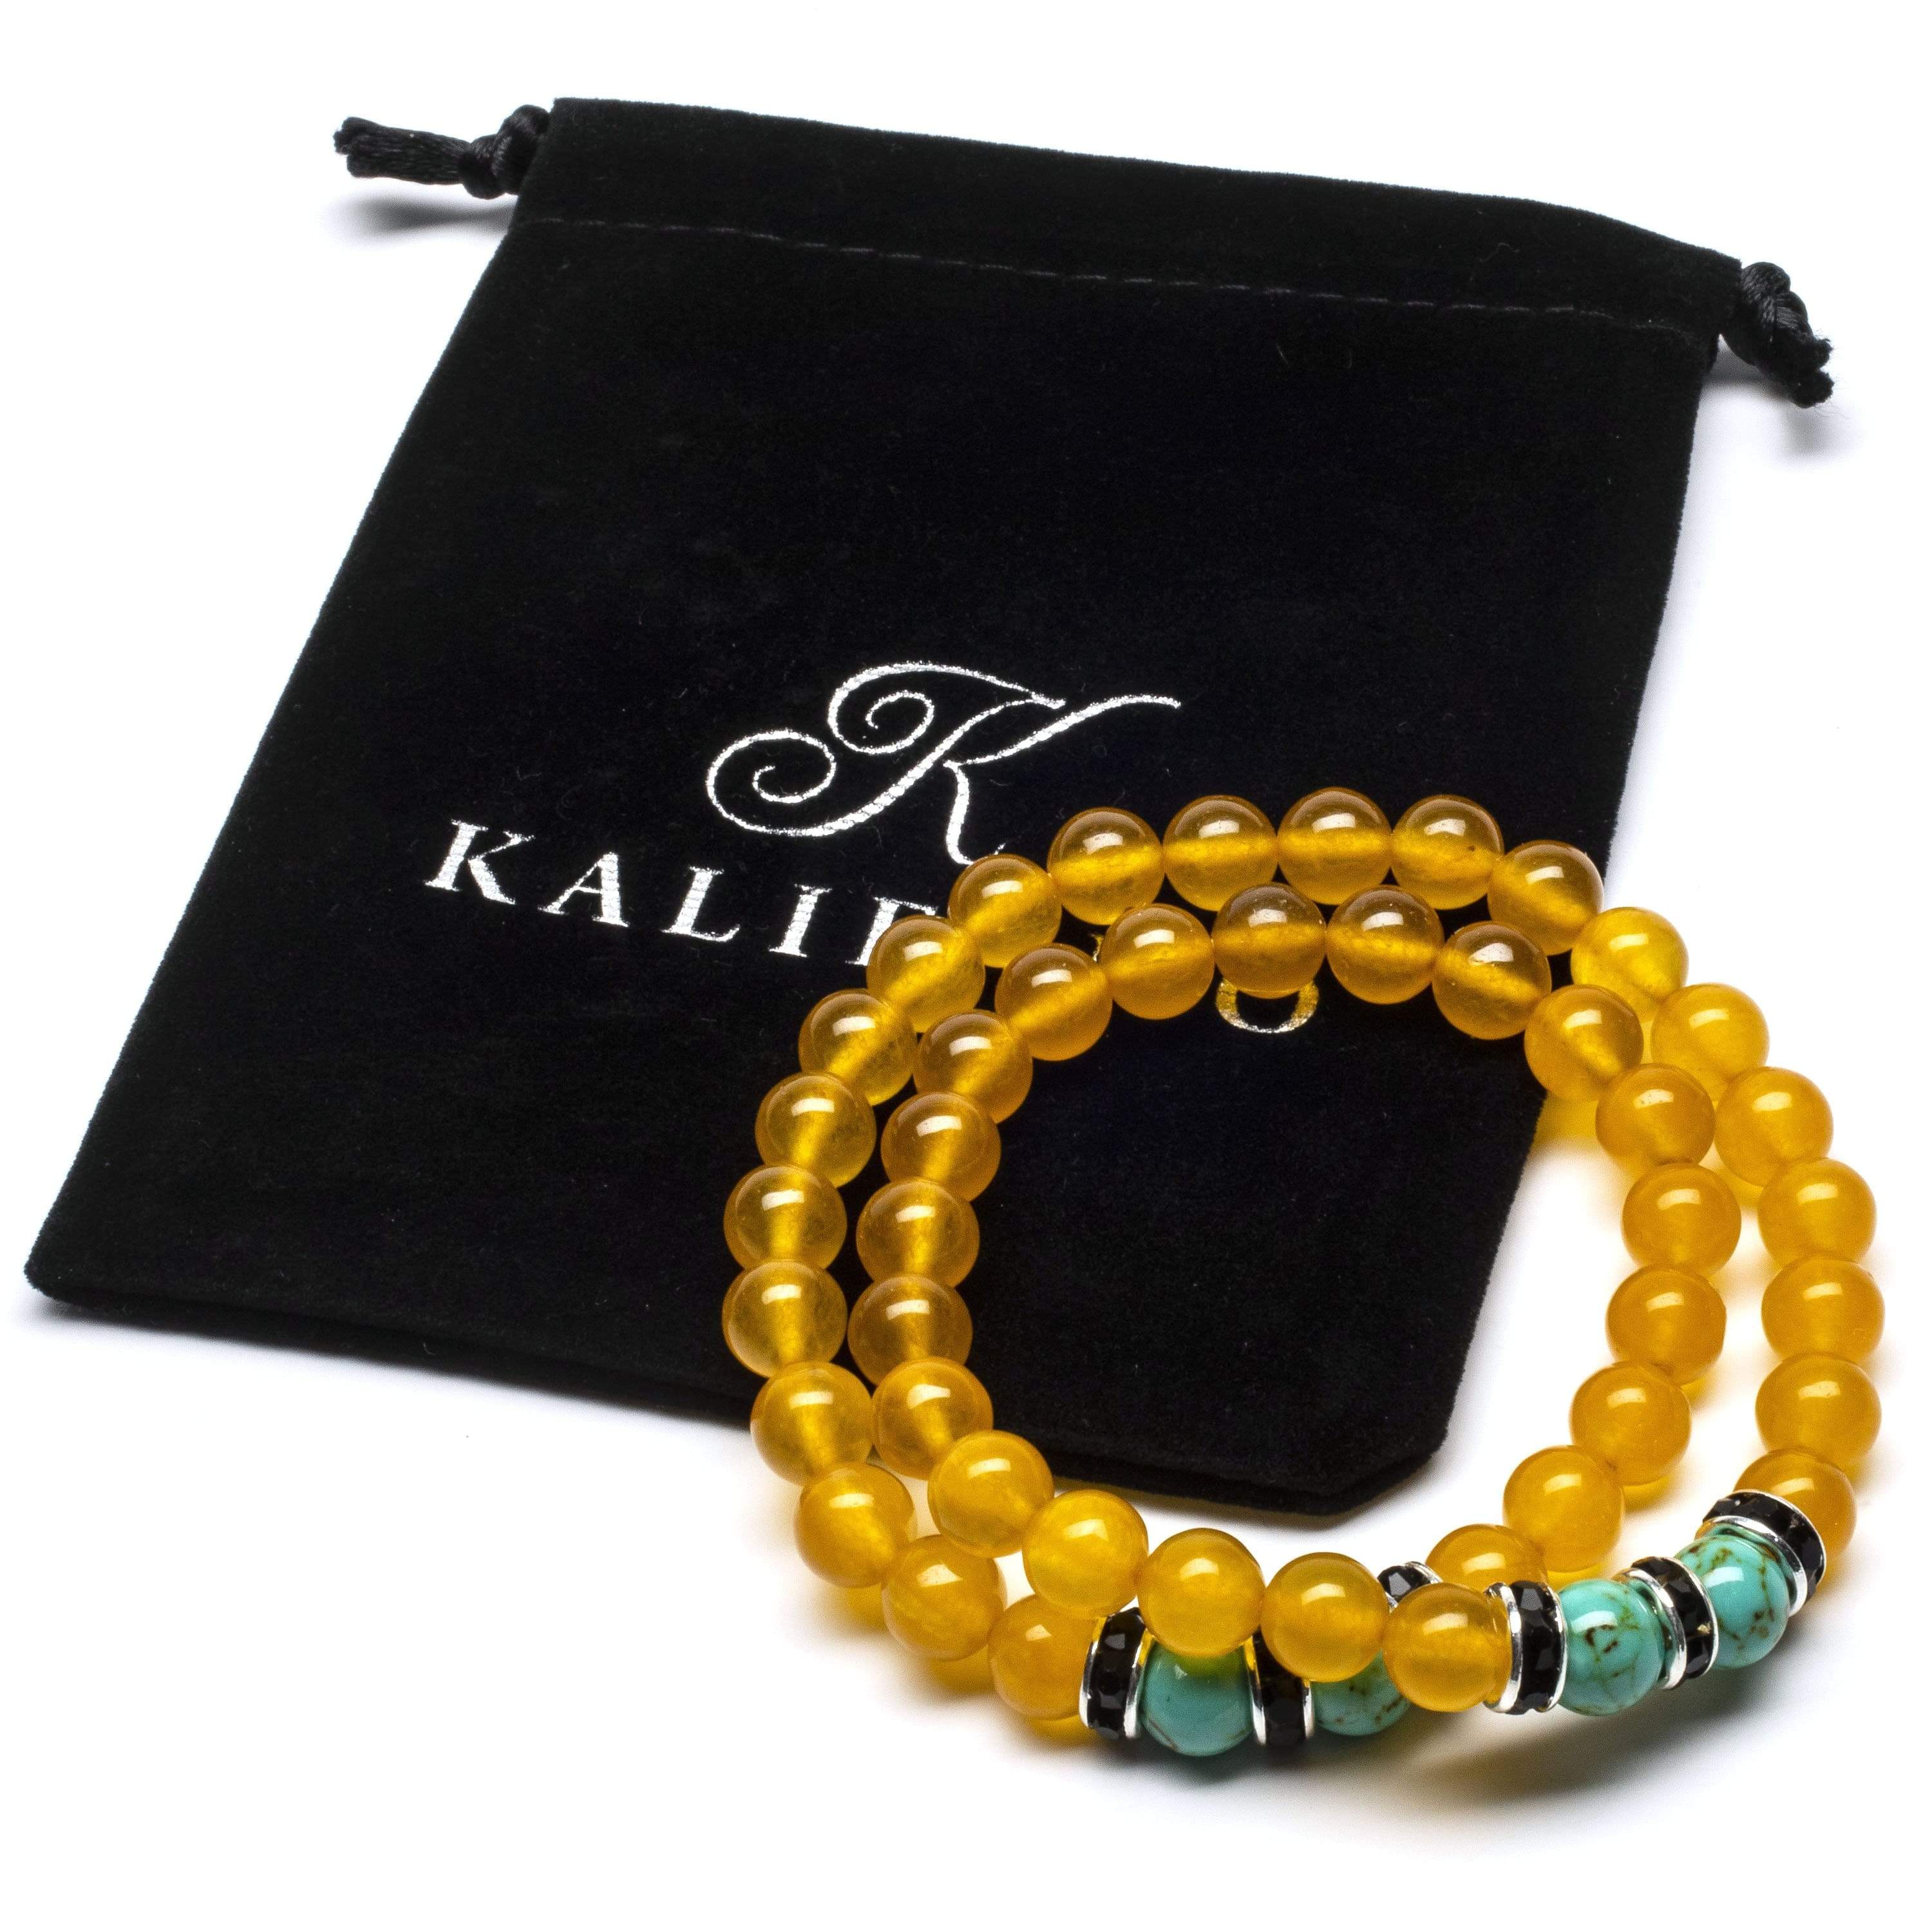 Kalifano Gemstone Bracelets Yellow Agate 8mm Beads with Howlite Turquoise and Black and Silver Accent Beads Double Wrap Elastic Gemstone Bracelet WHITE-BGI2-029